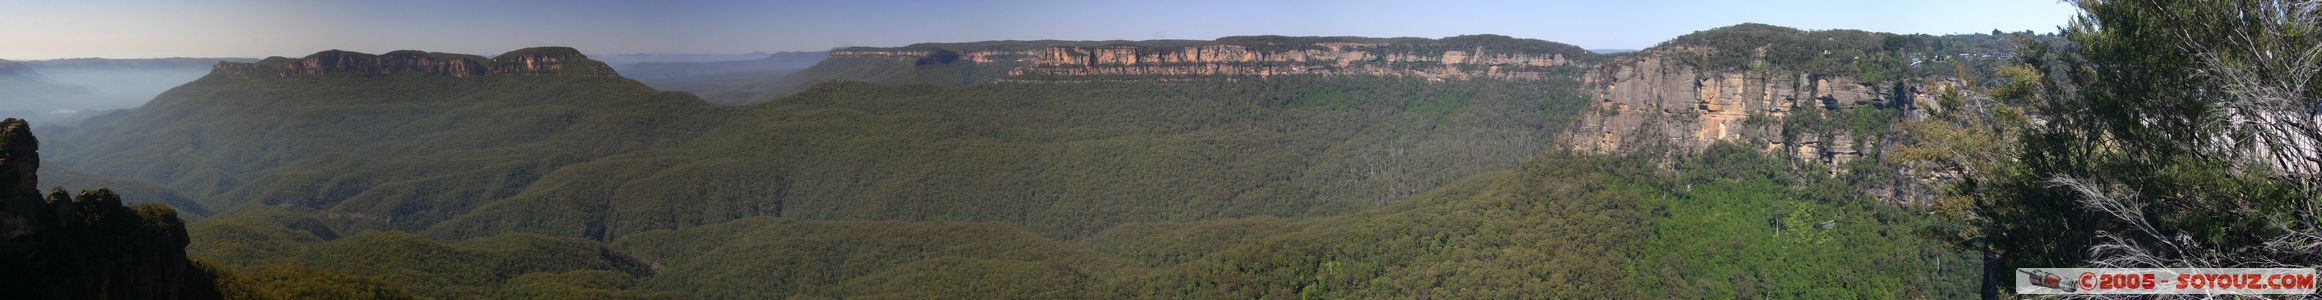 Blue Mountains - Echo Point - panorama
